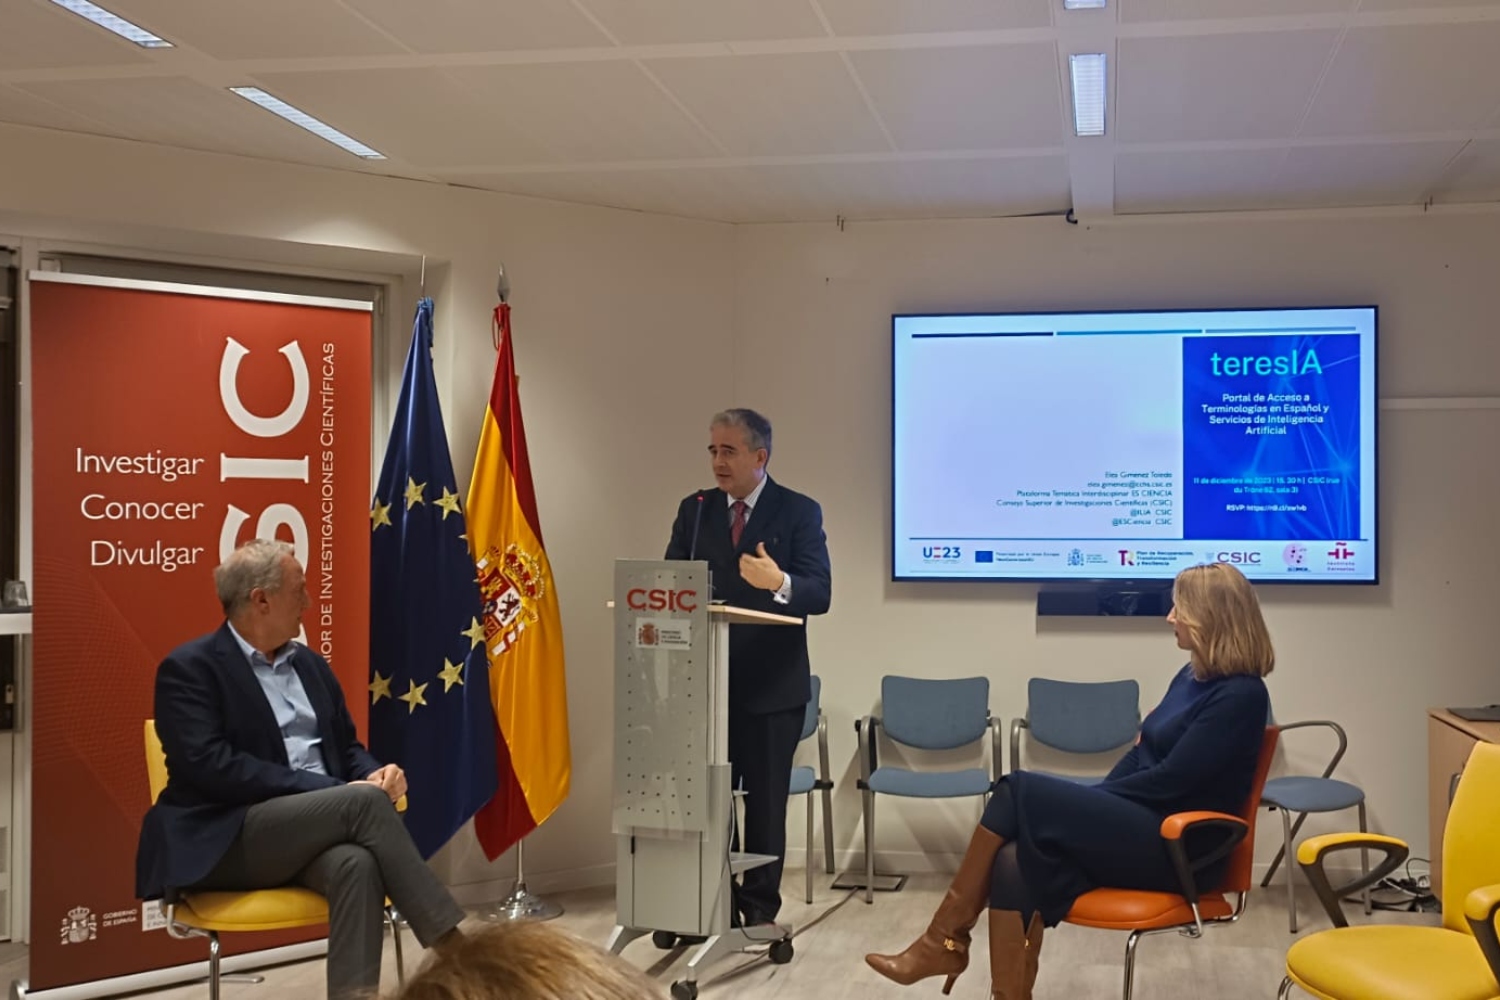 Presentation of the TeresIA project for Spanish terminology